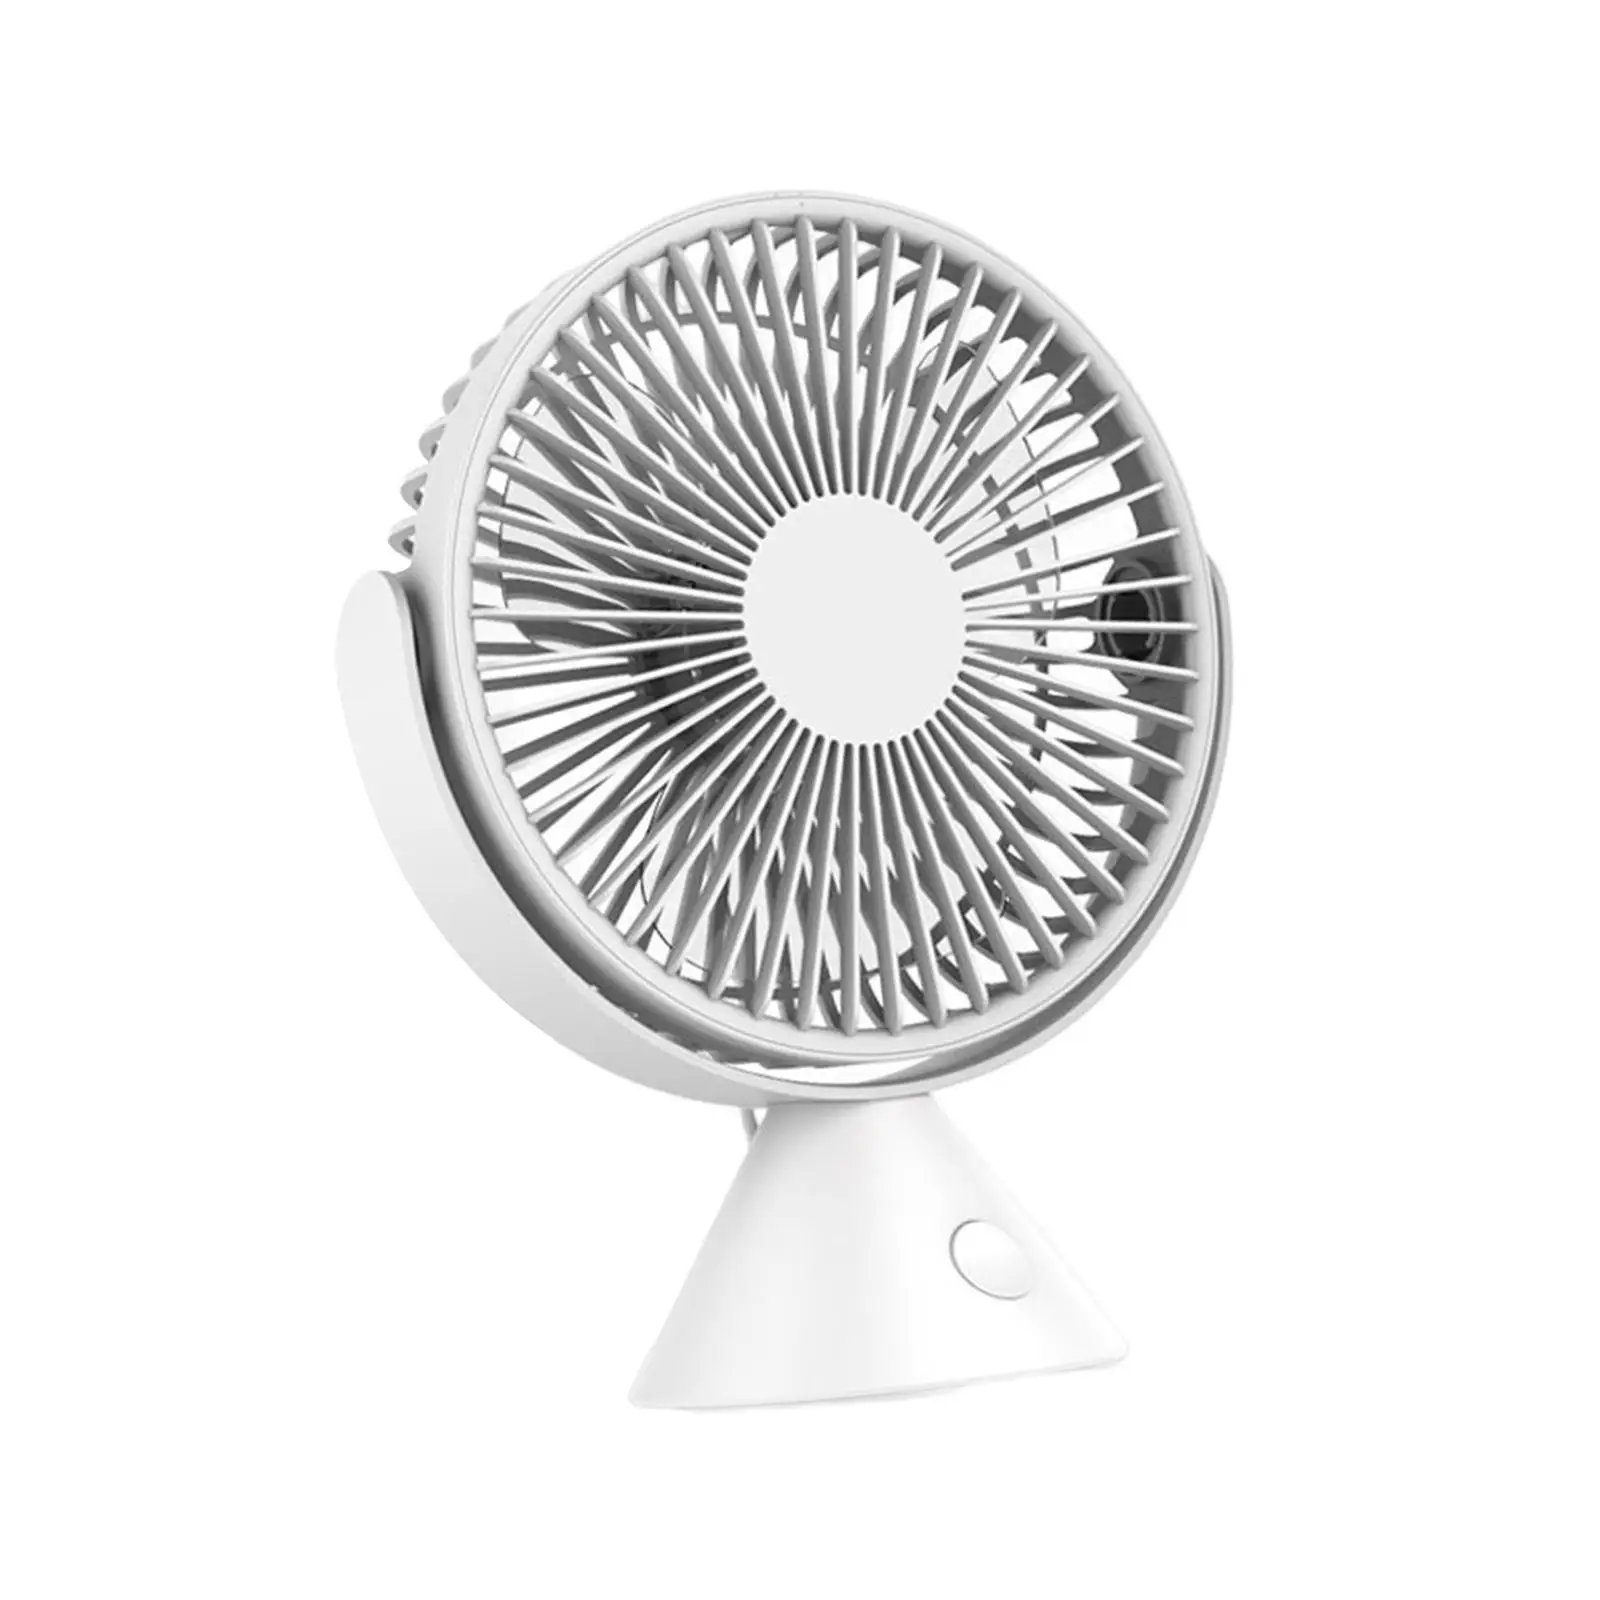 Desk Fan Classic Personal Fan Quiet Operation with Strong Wind Desktop Fan for Bedroom Table and Desktop Travel Outdoor Camping